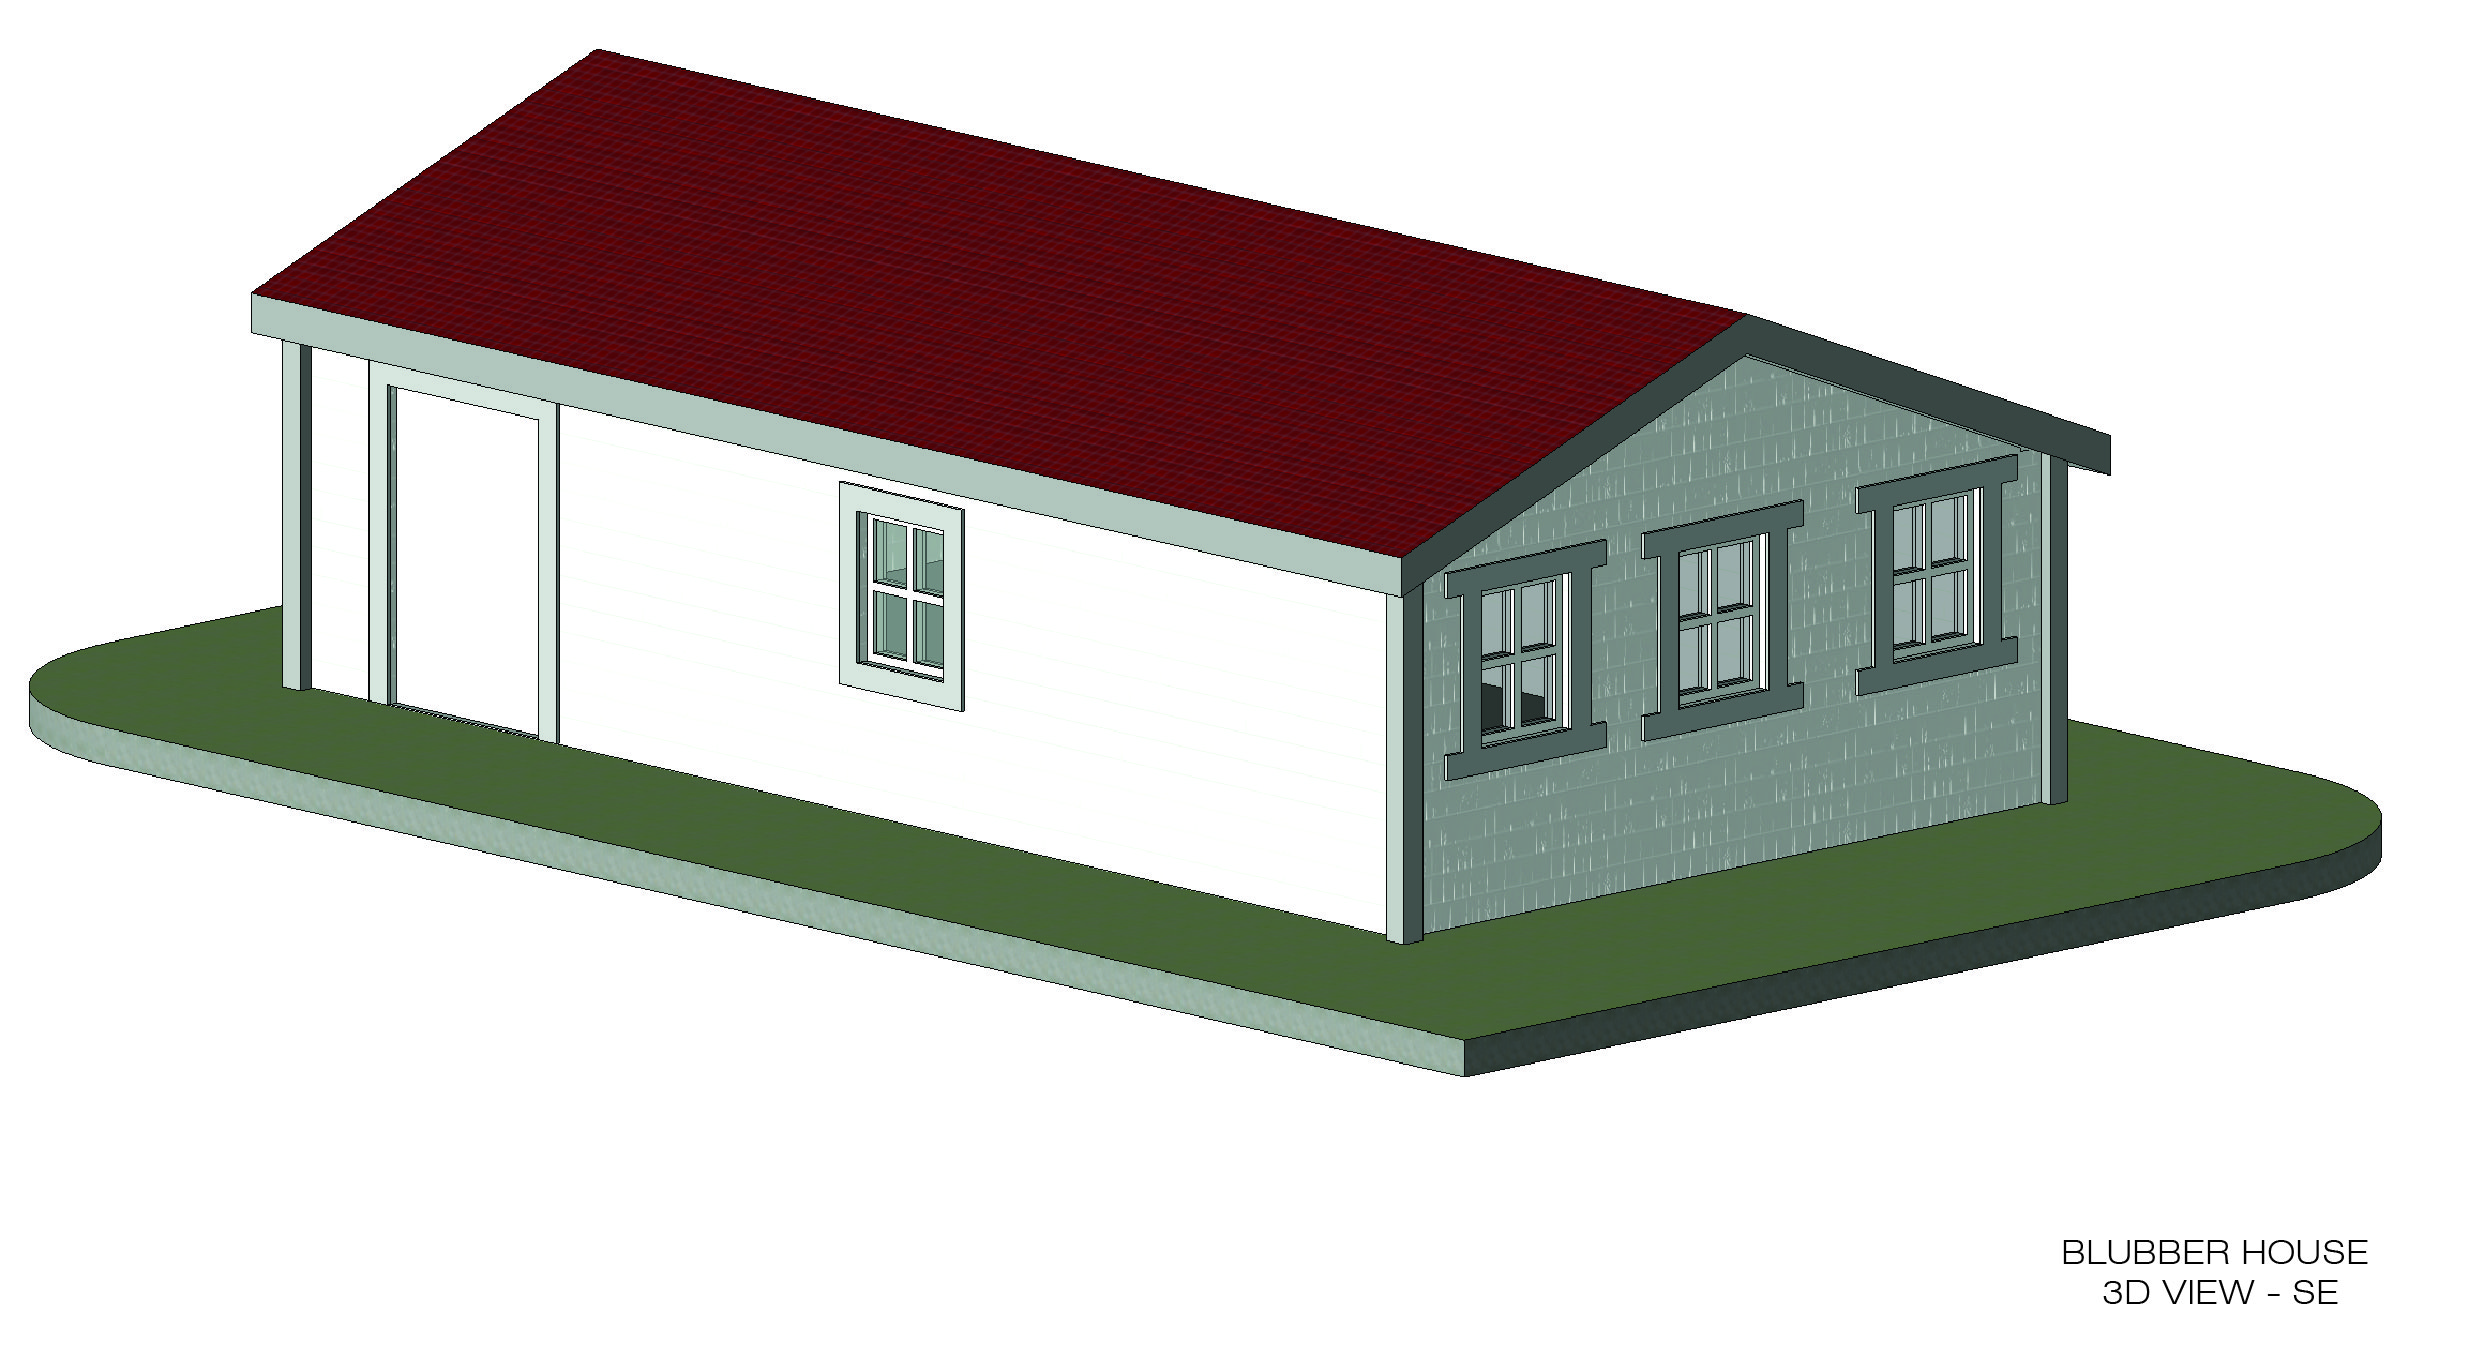 3D view of the southeast corner of the blubber house, created in Revit based off the documentation with the terrestrial laser scanner.